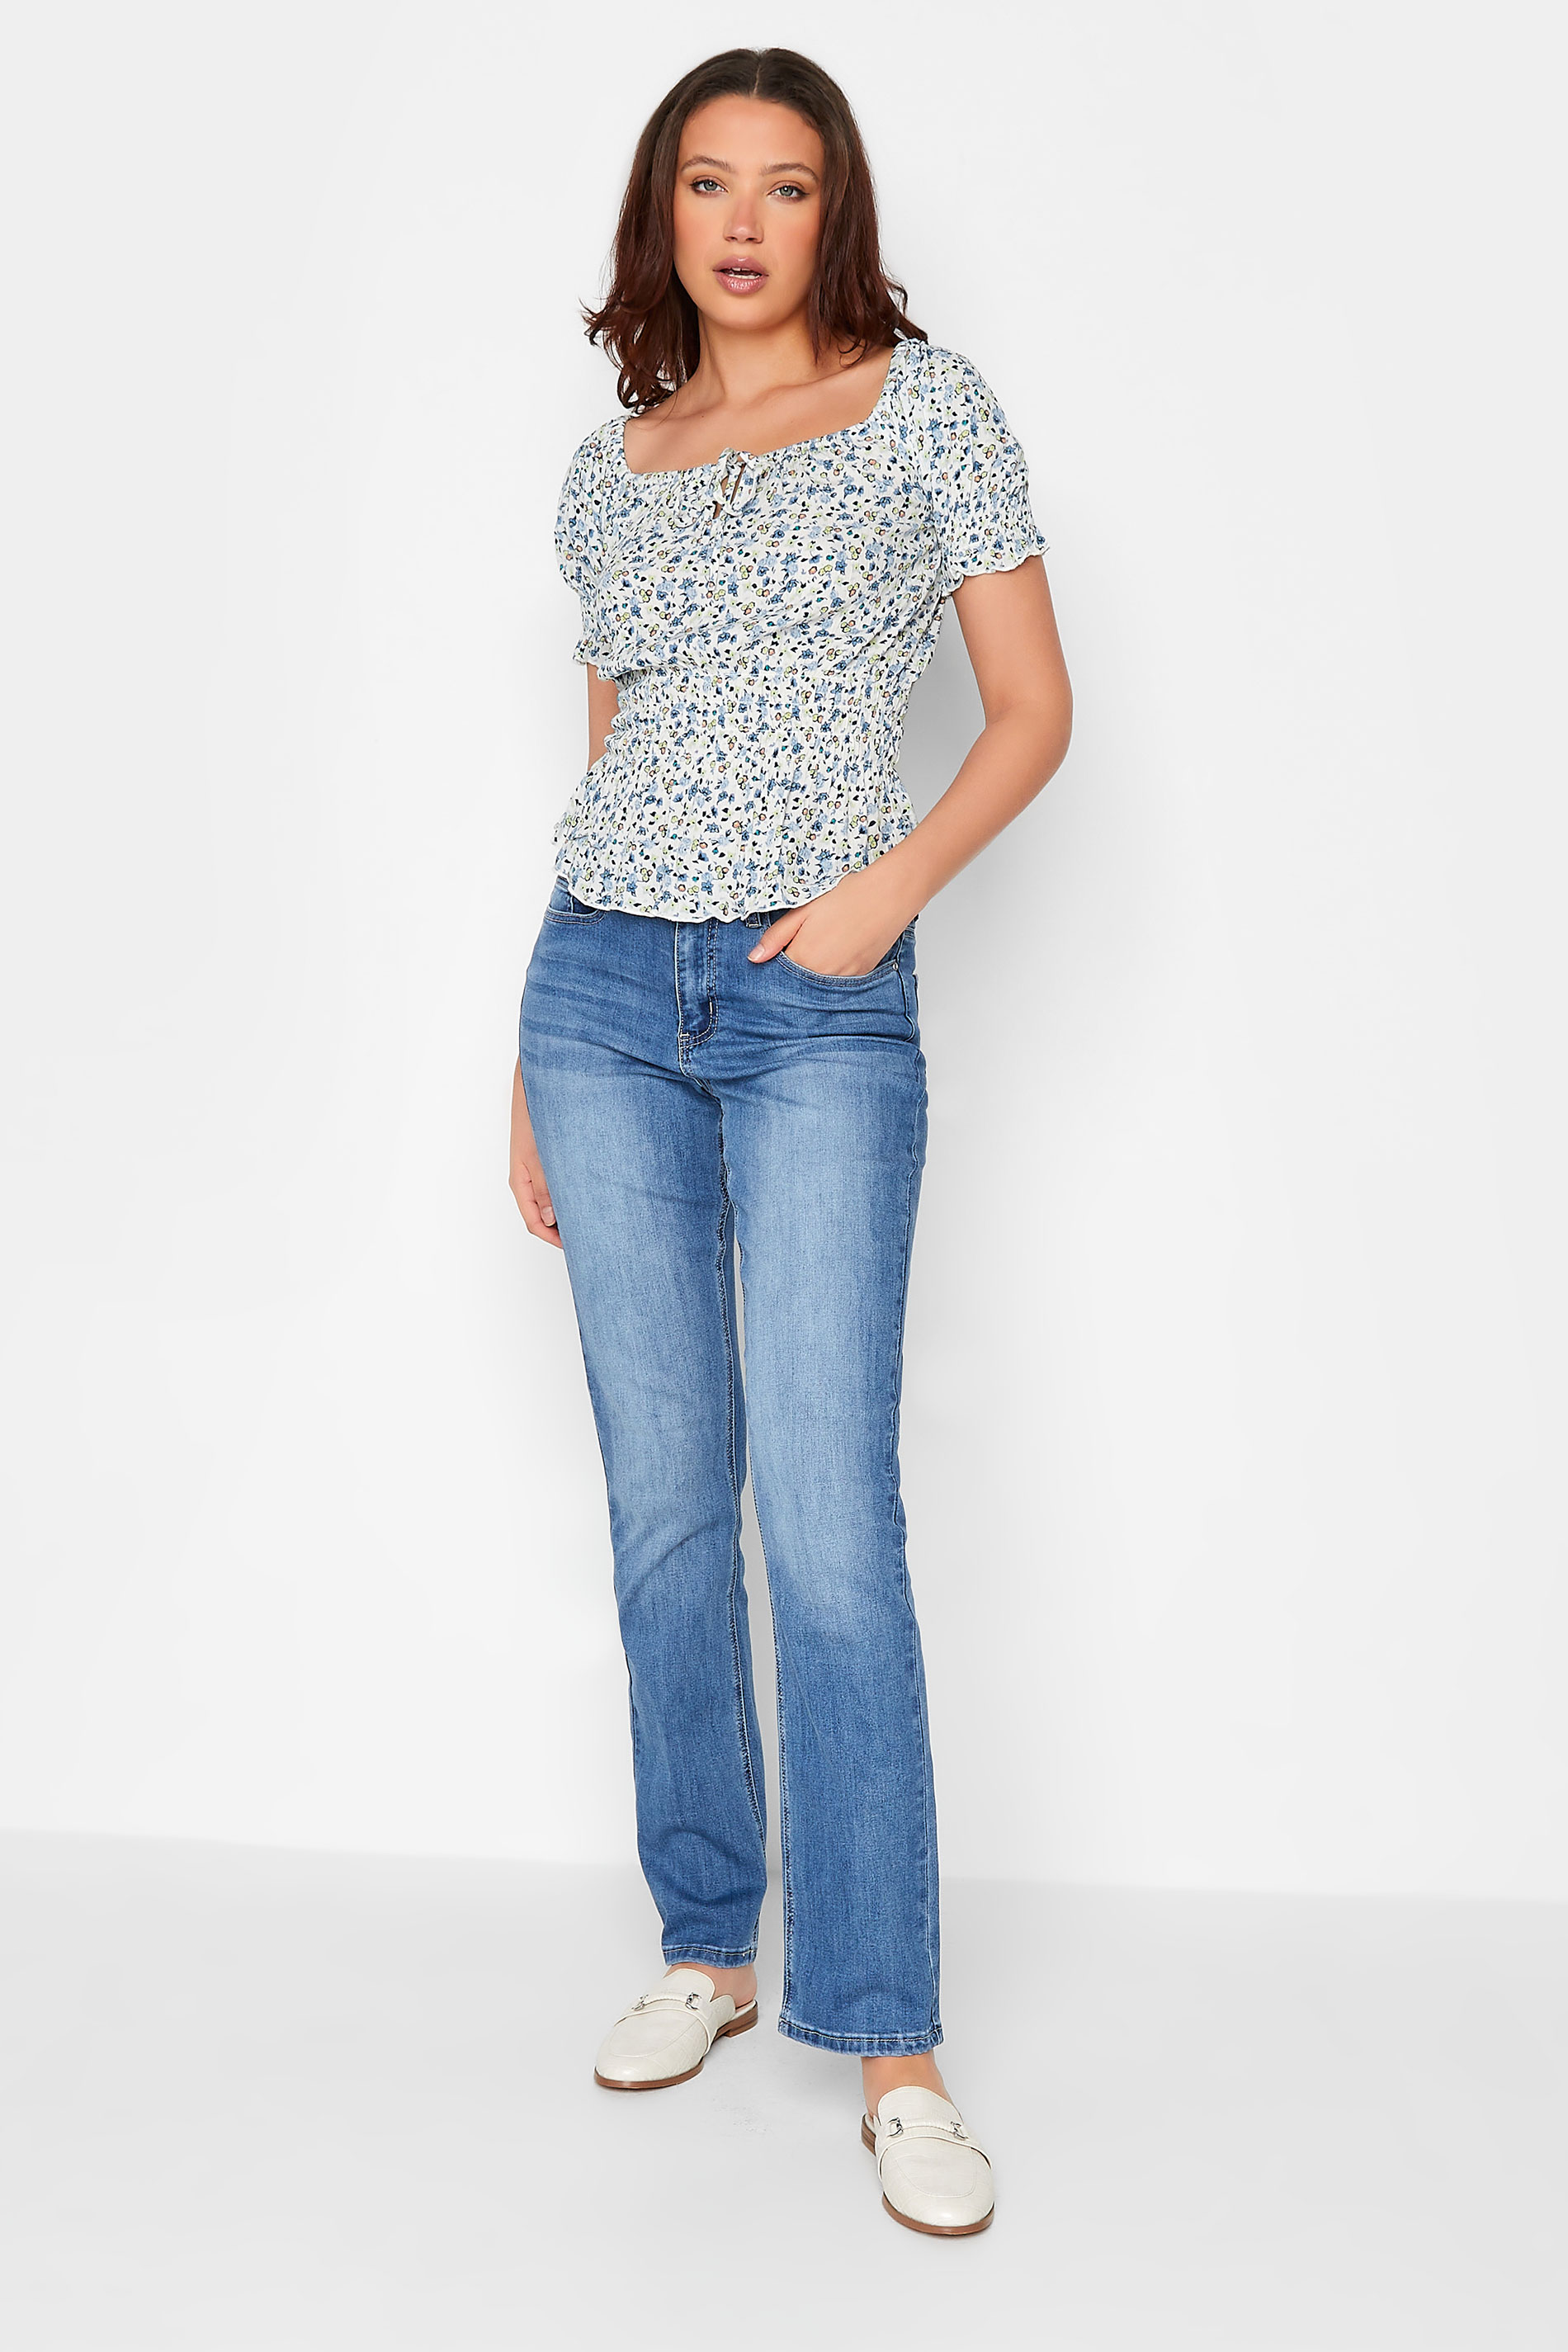 LTS Tall Women's White & Blue Floral Crinkle Bardot Top | Long Tall Sally 2